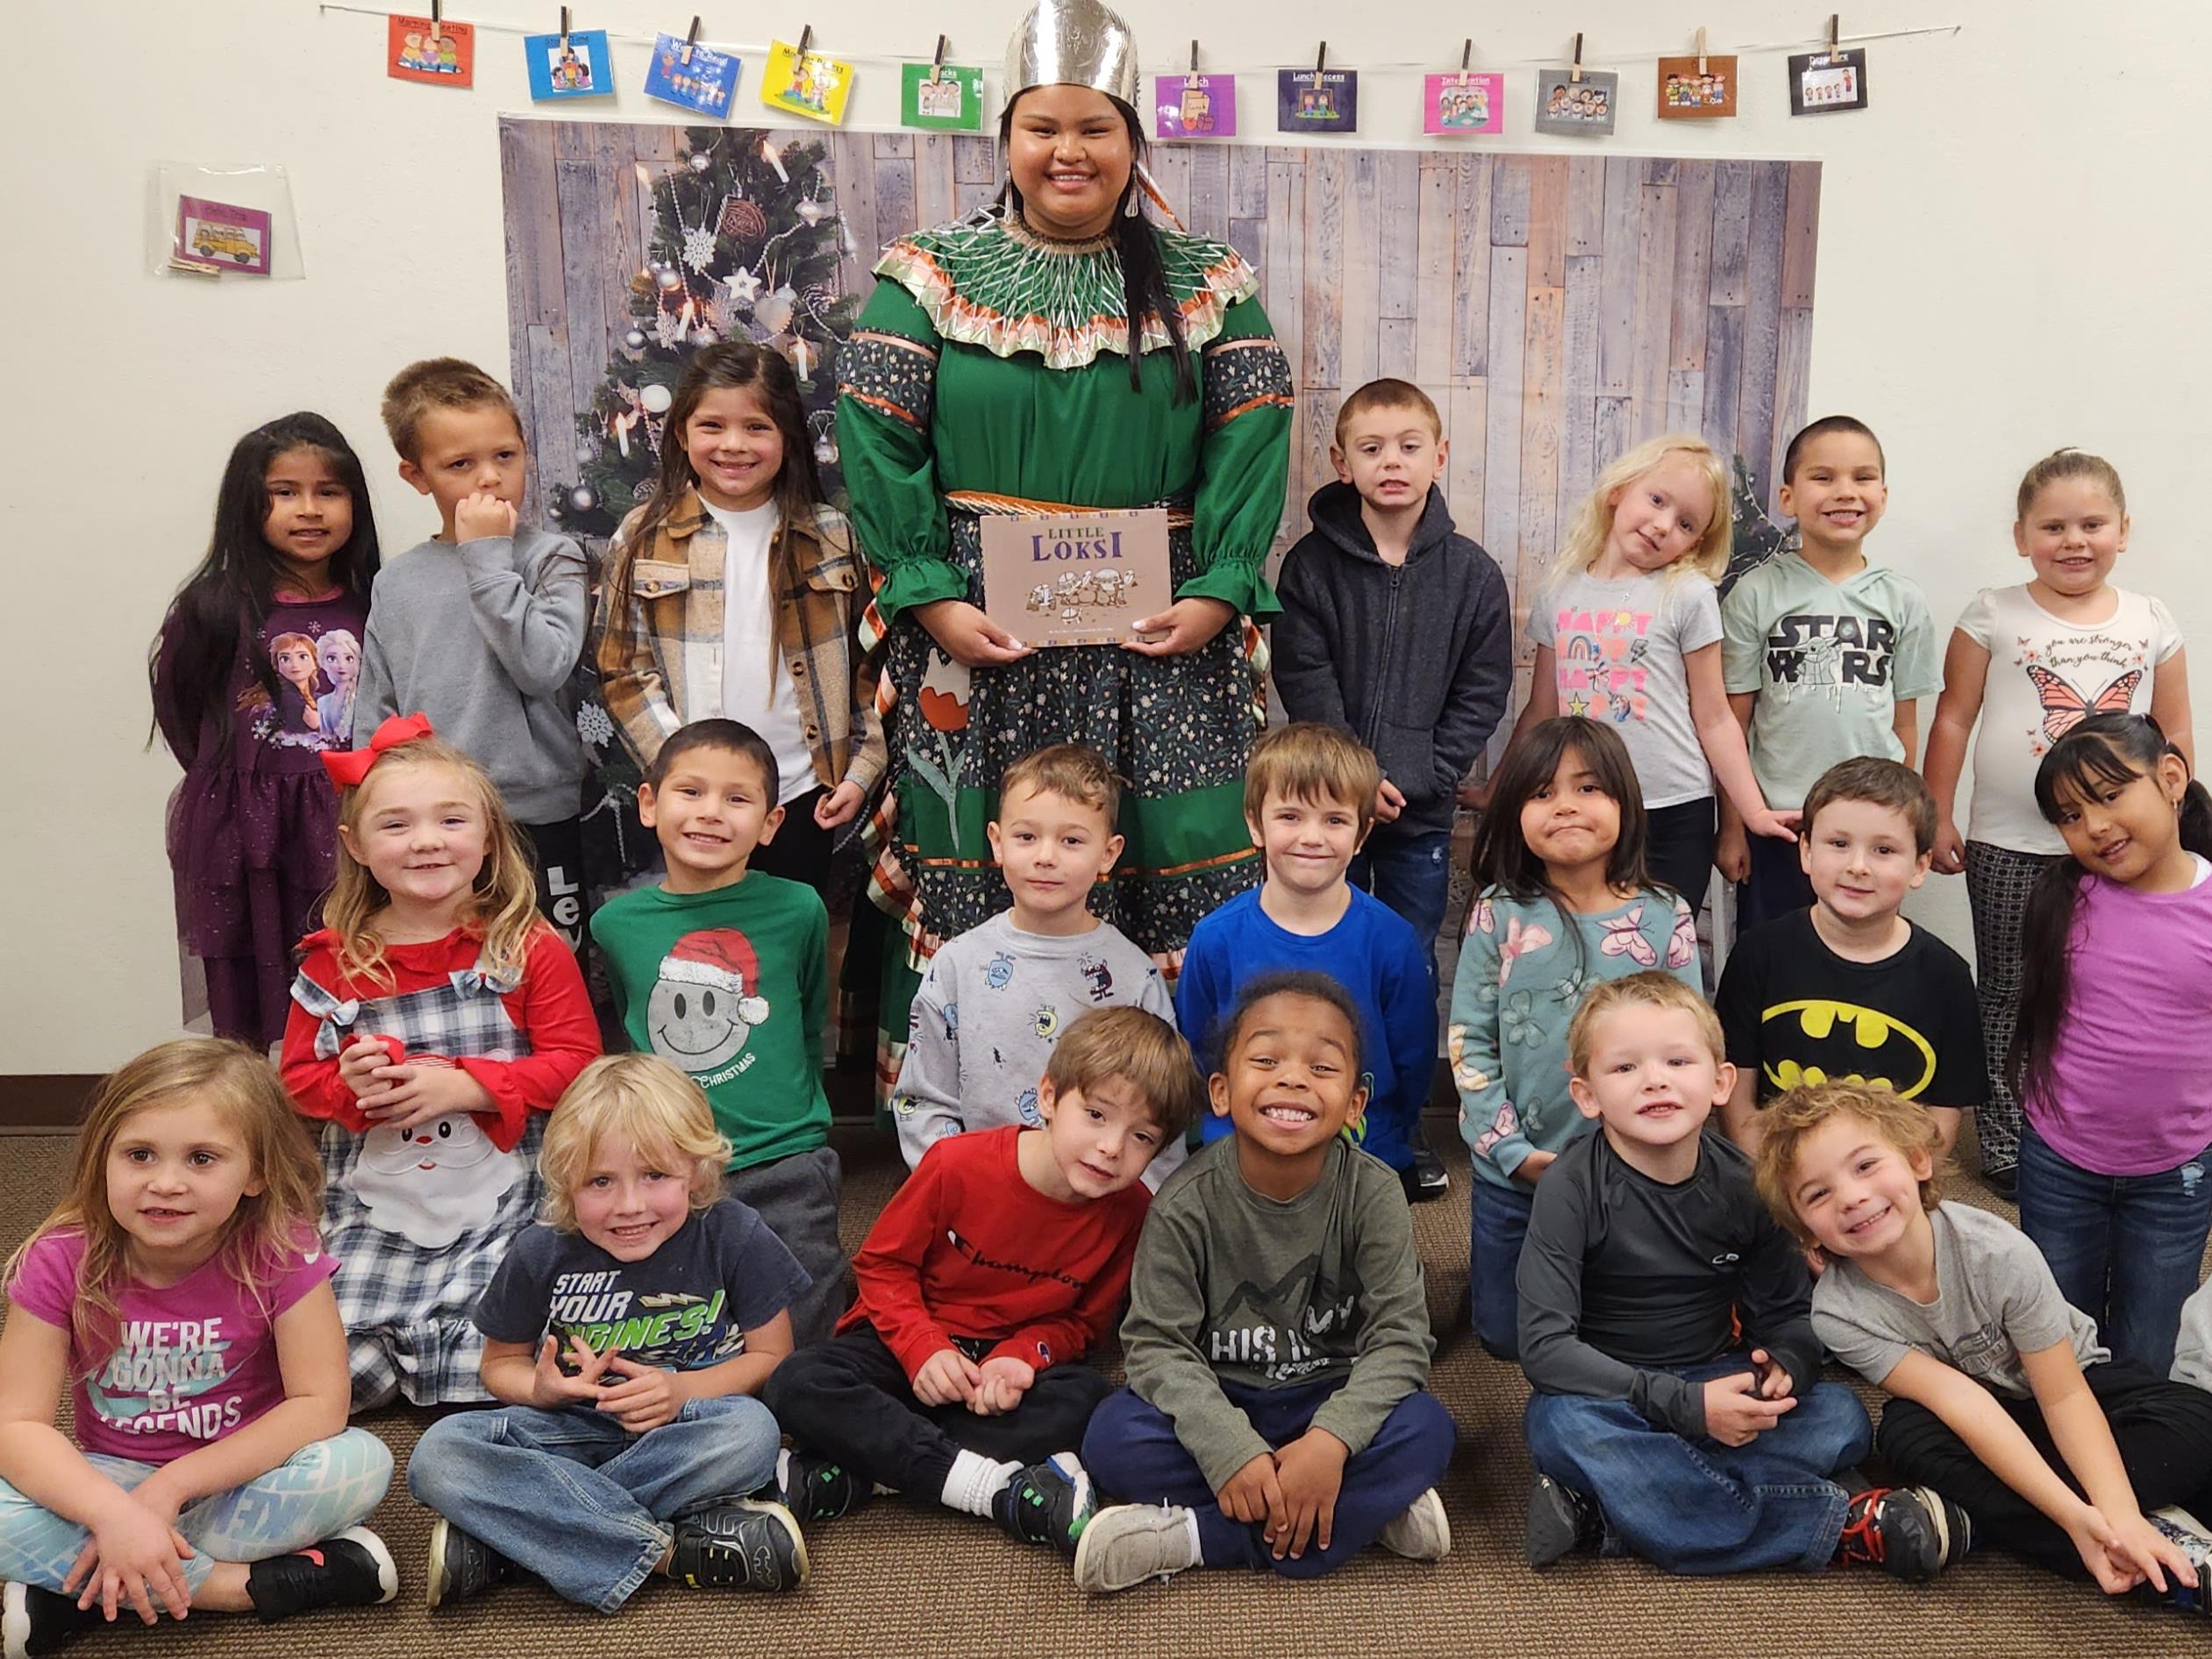 Chickasaw Princess poses with class of students